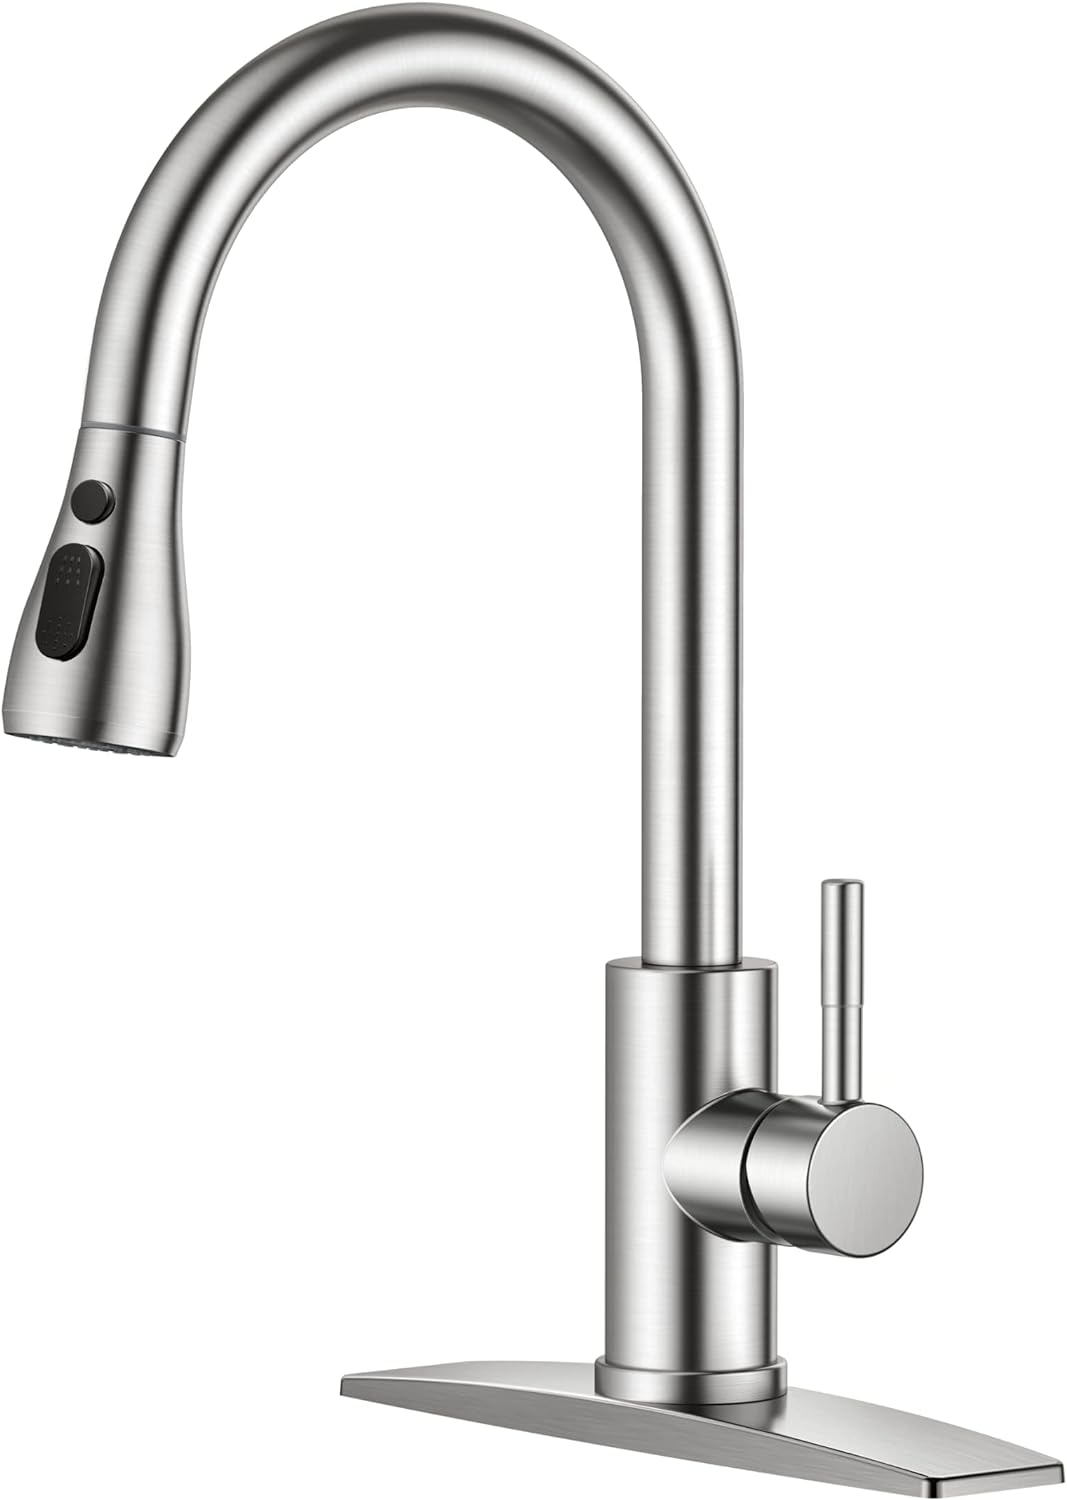 I bought this faucet to replace an existing faucet in our kitchen & it was very easy to install. You also can't beat the price! The new faucet included simple easy to read directions for one hole and two hole application. The faucet operation is very user friendly. The handle motion is smooth and sprayer detaches and moves and retracts freely. Nozzle head has 2 convenient settings to turn water off and on and a setting to change flow from stream to spray. Over all, very happy - This faucet is we